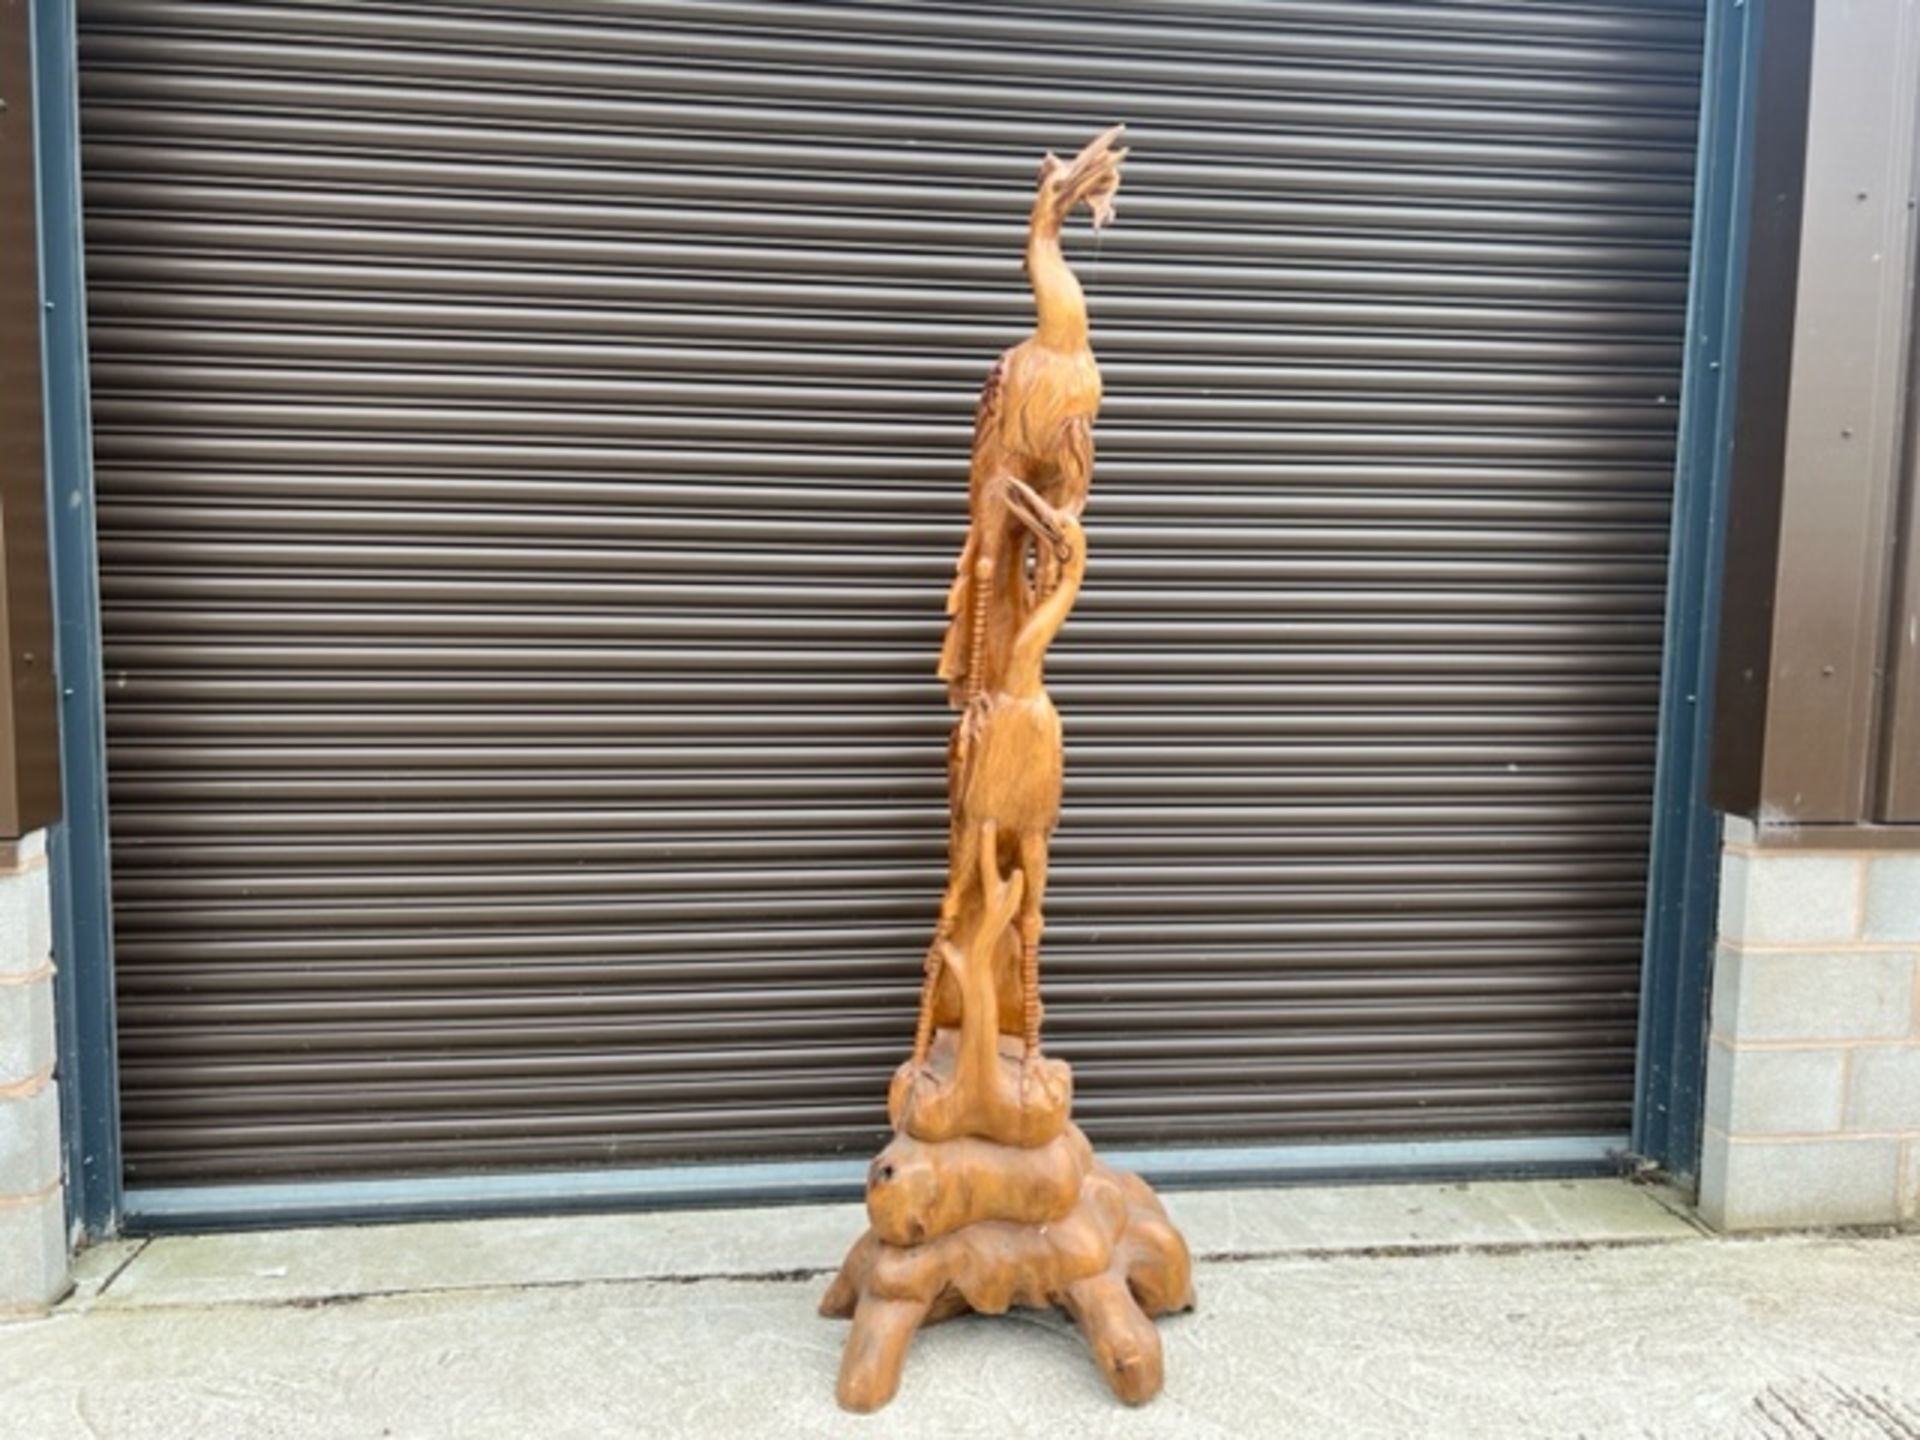 7Ft Tall Wooden Carving Depicting Birds Feeding - Image 2 of 5